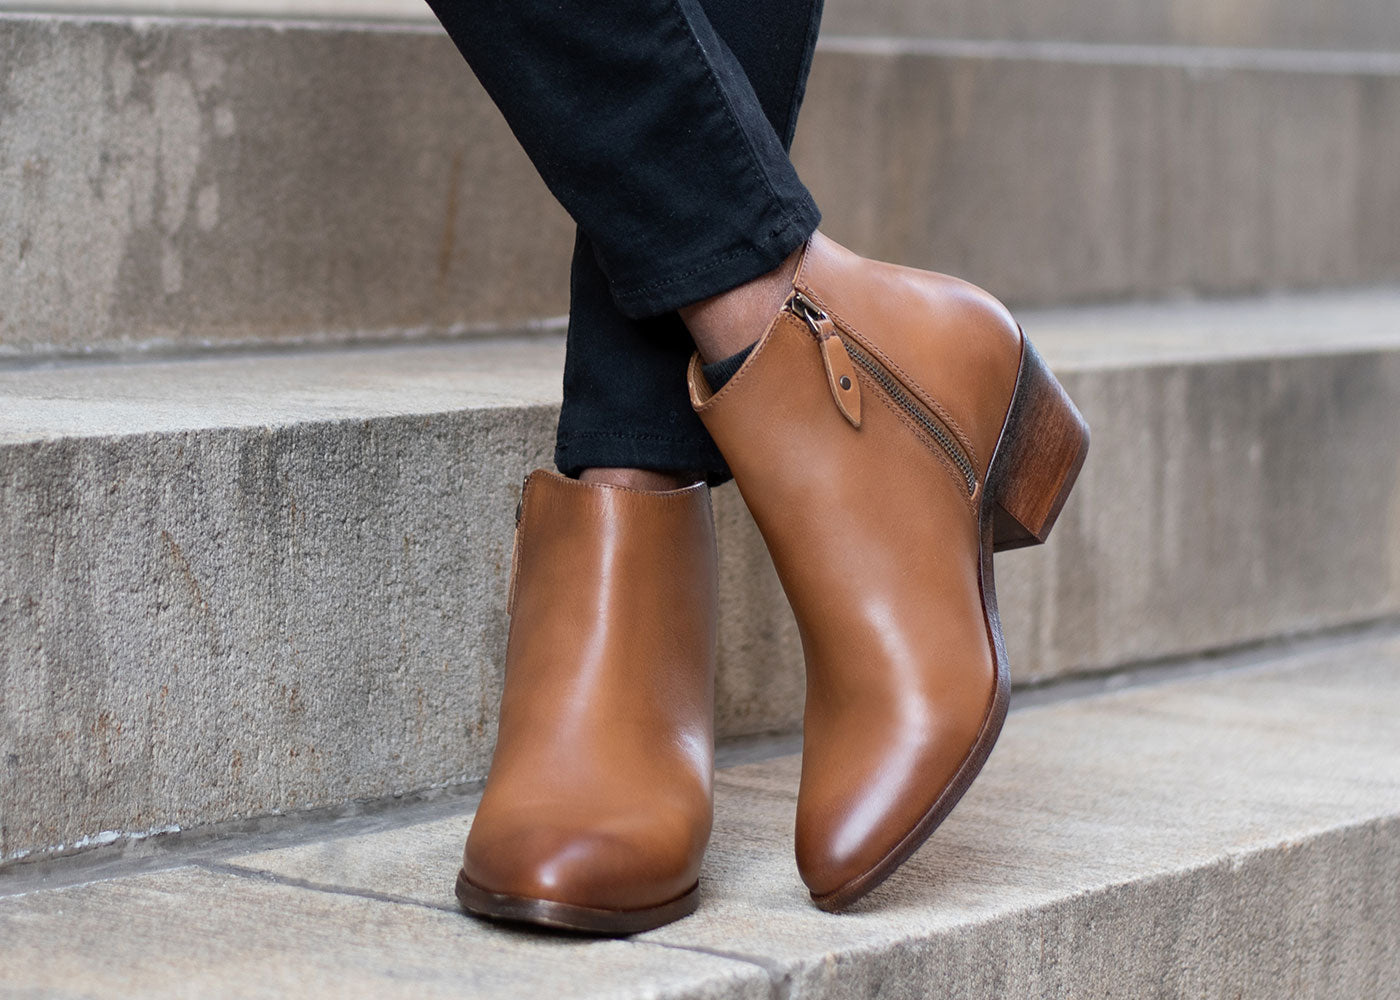 The Best Women's Boots: The Downtown Bootie